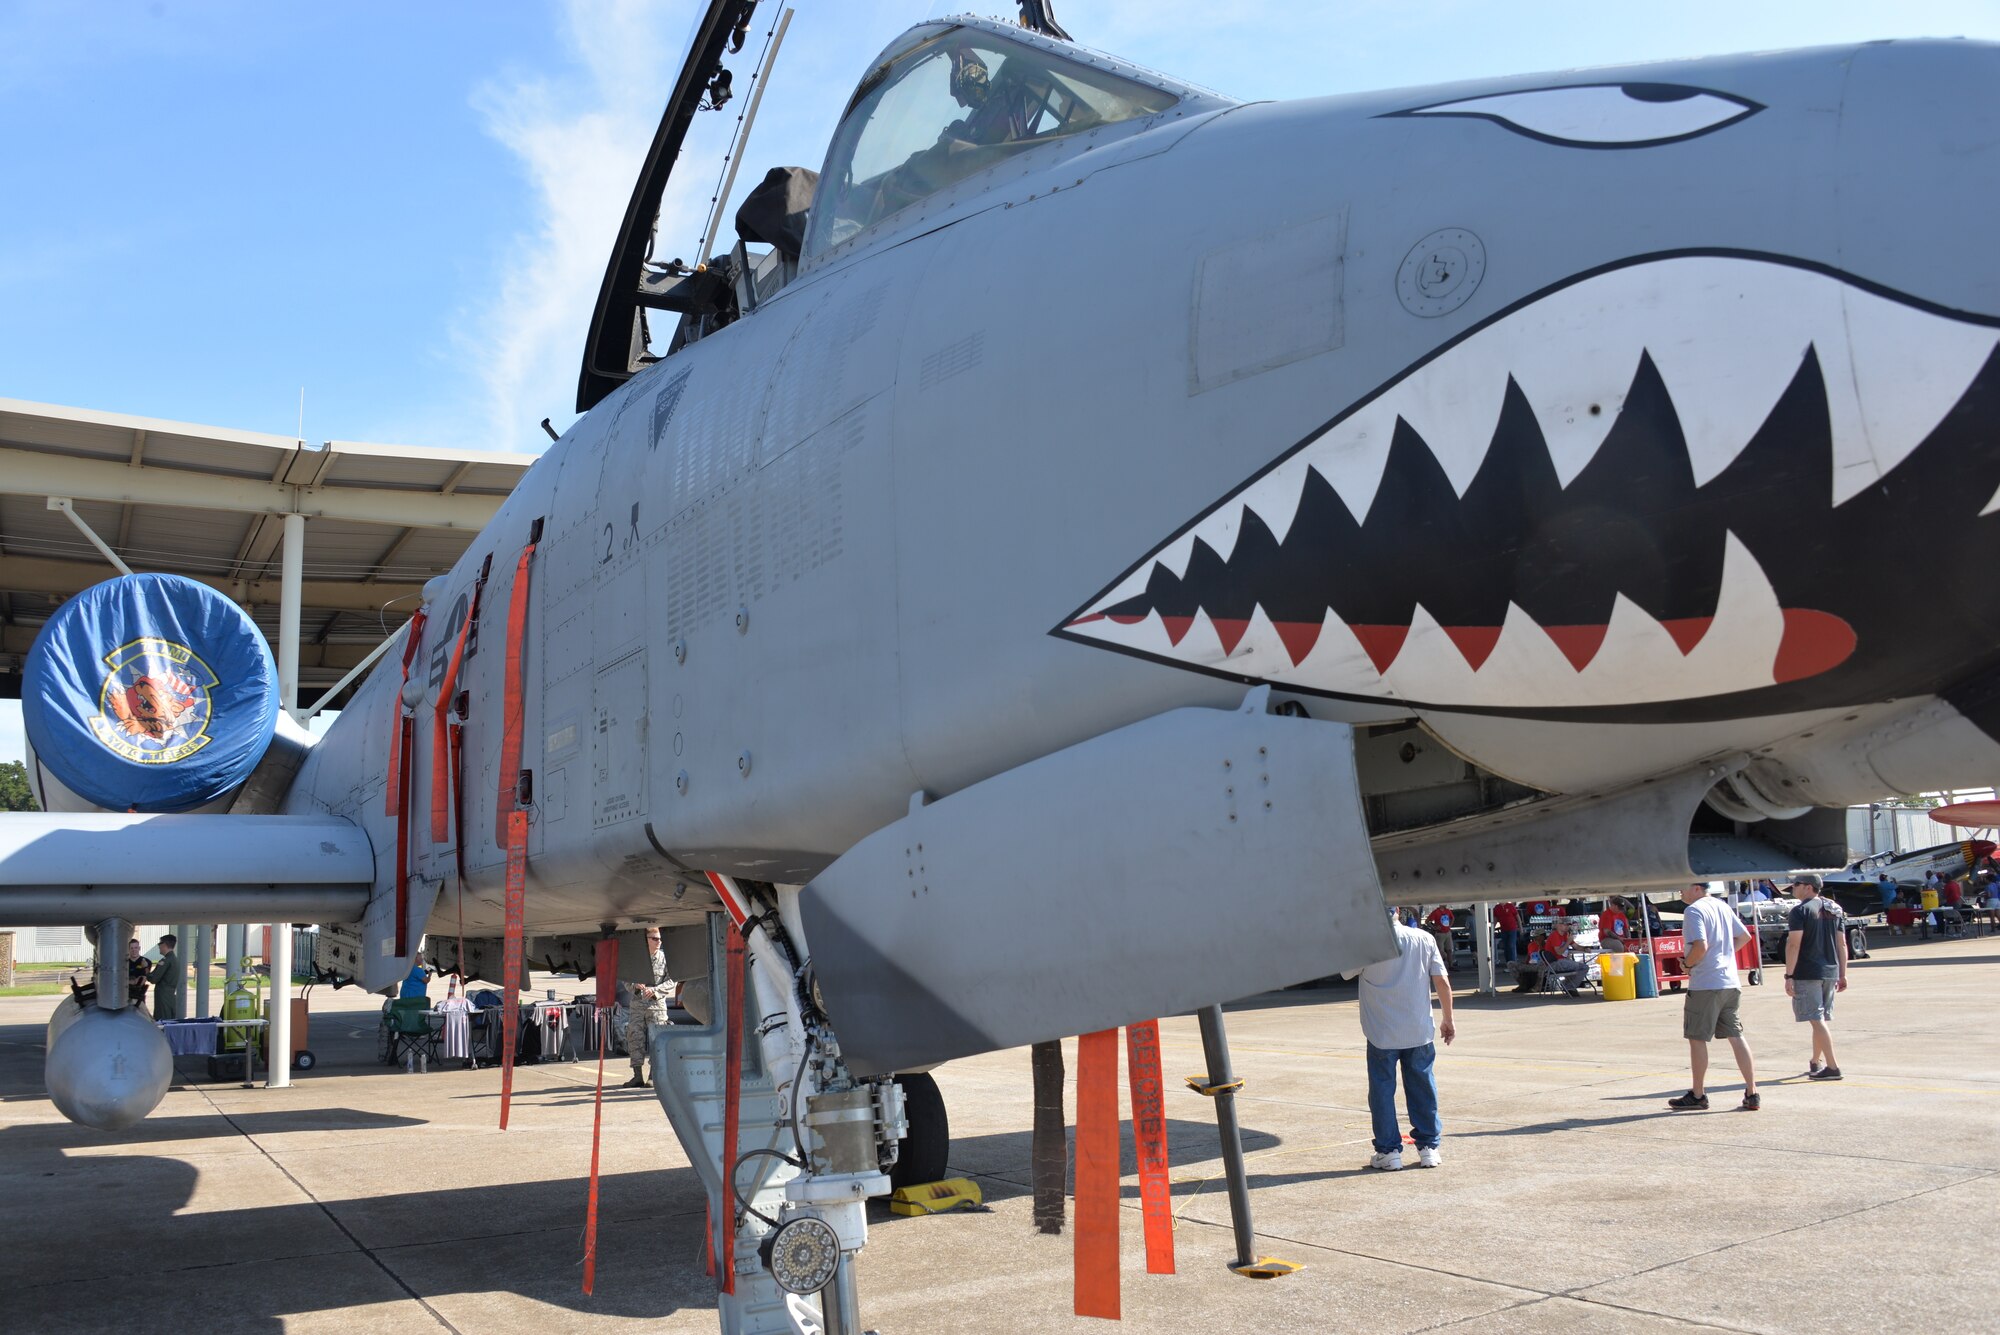 A-10 on display at the 187th Red Tails over Montgomery, Sept. 8, at Dannelly Field, Alabama. (U.S. Air Force photo by Staff Sergeant Christopher Horton)